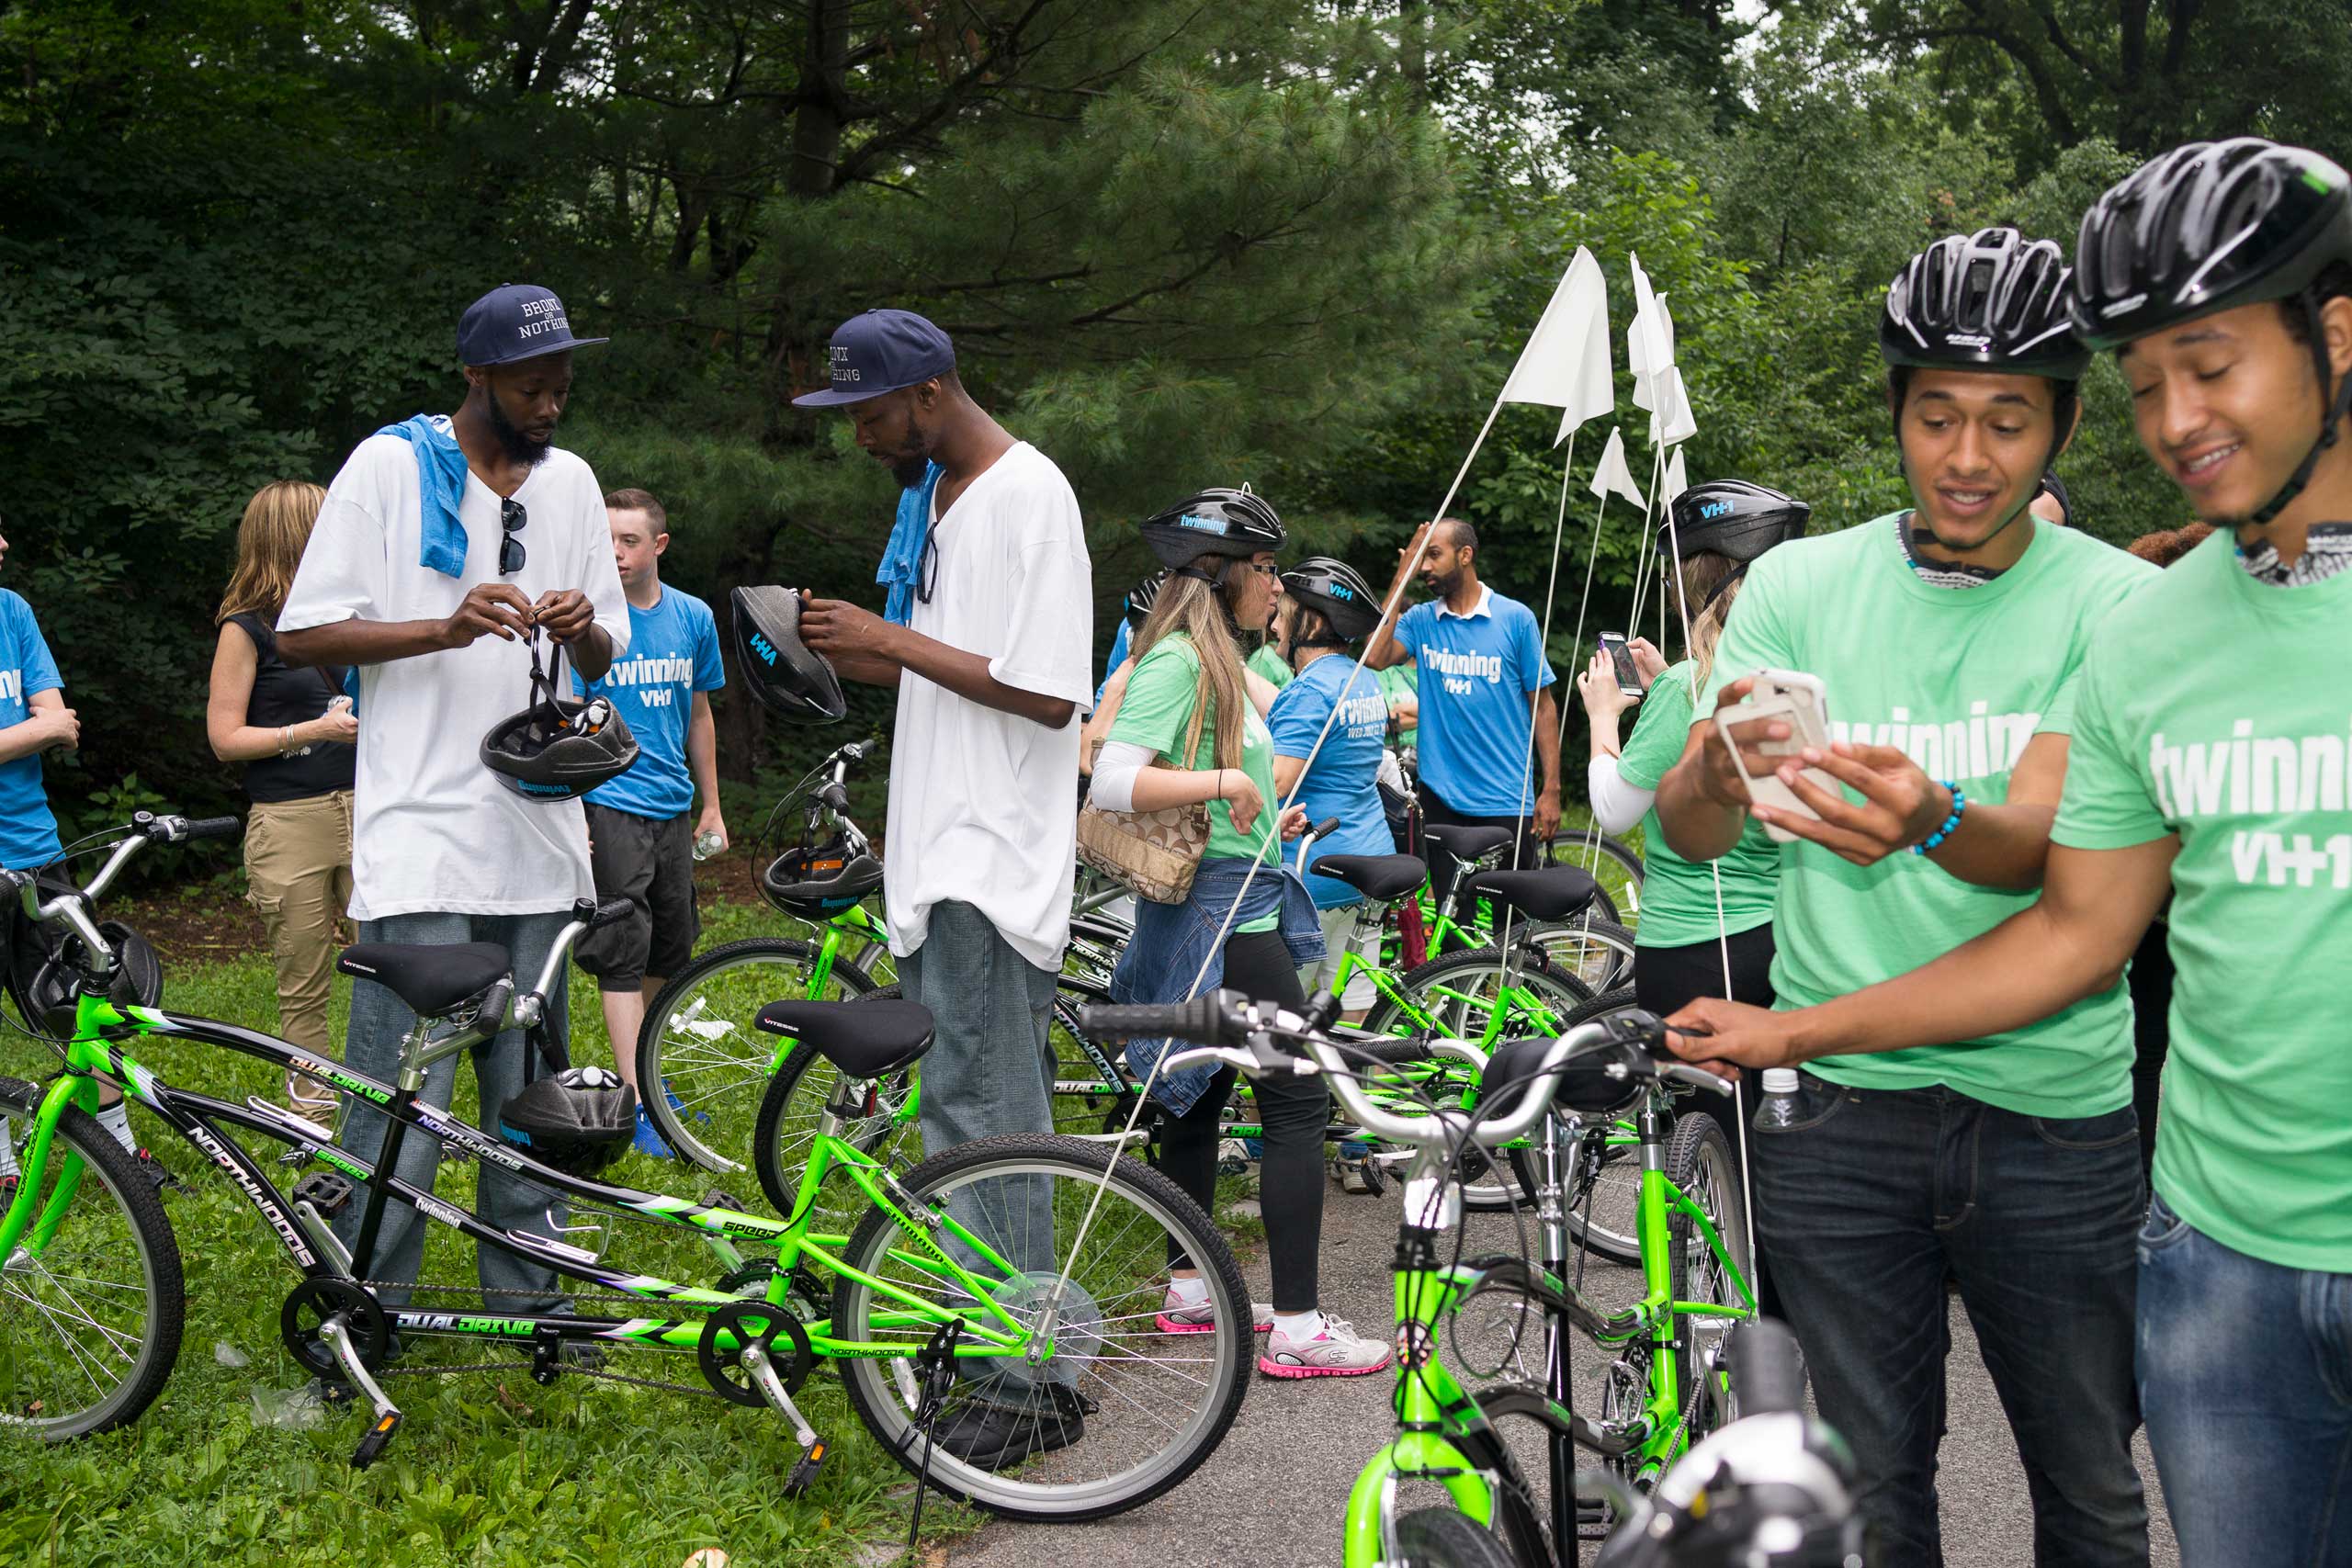 Twins gather before hundreds of twins ride tandem bikes in an attempt to set the record for the most twins ever riding tandem bikes, in Central Park in New York City on July 15, 2015.